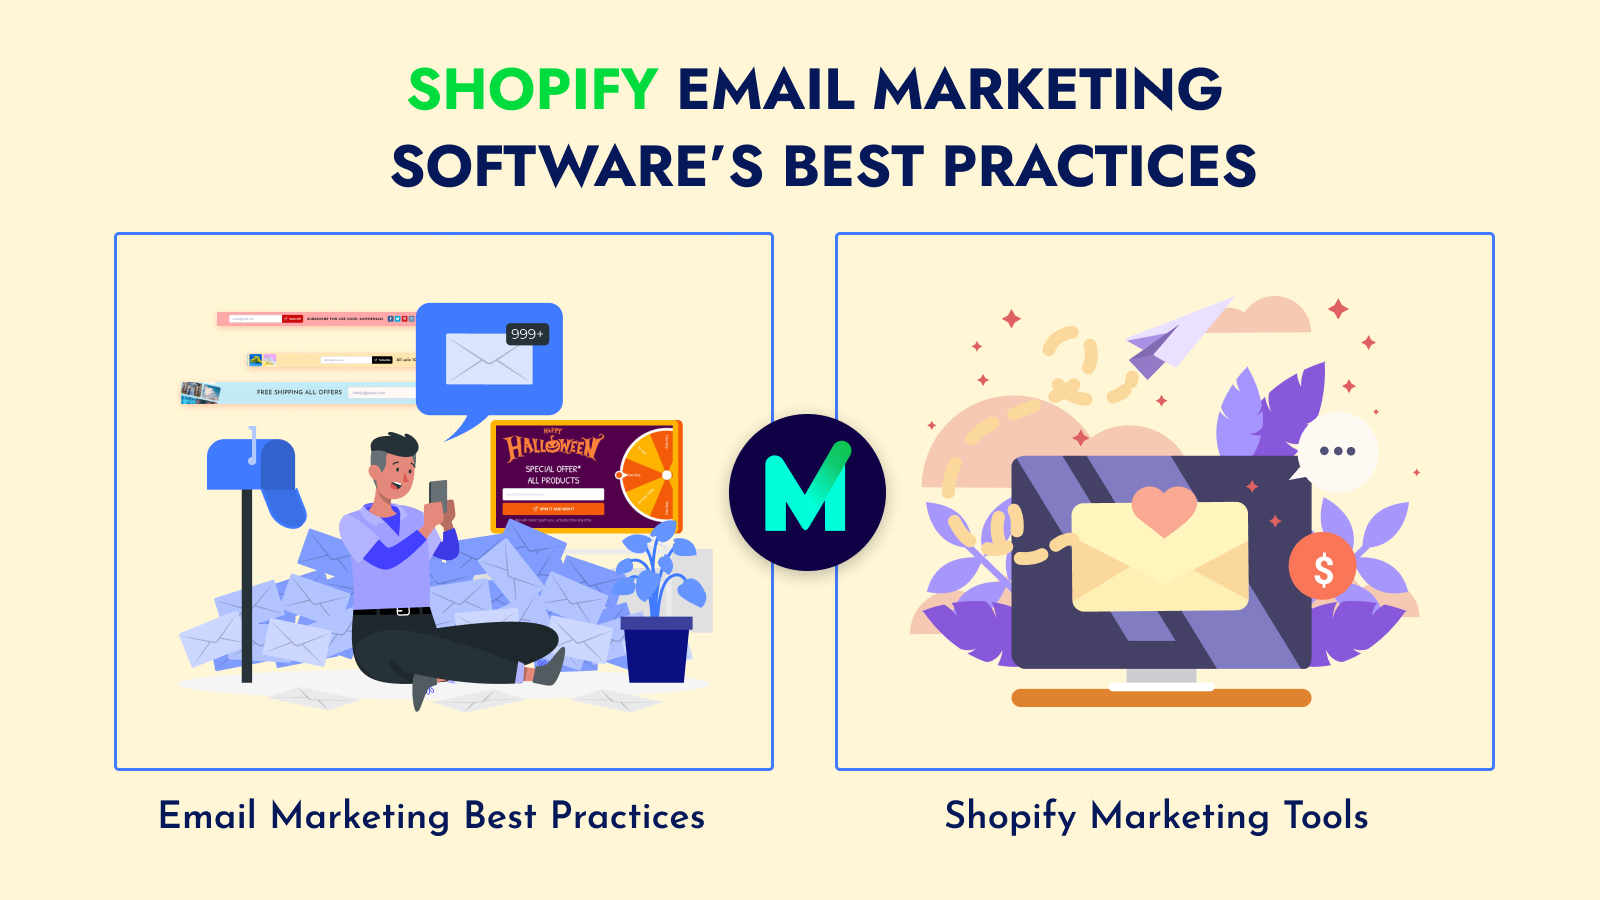 Shopify-email-marketing-software-best-practices